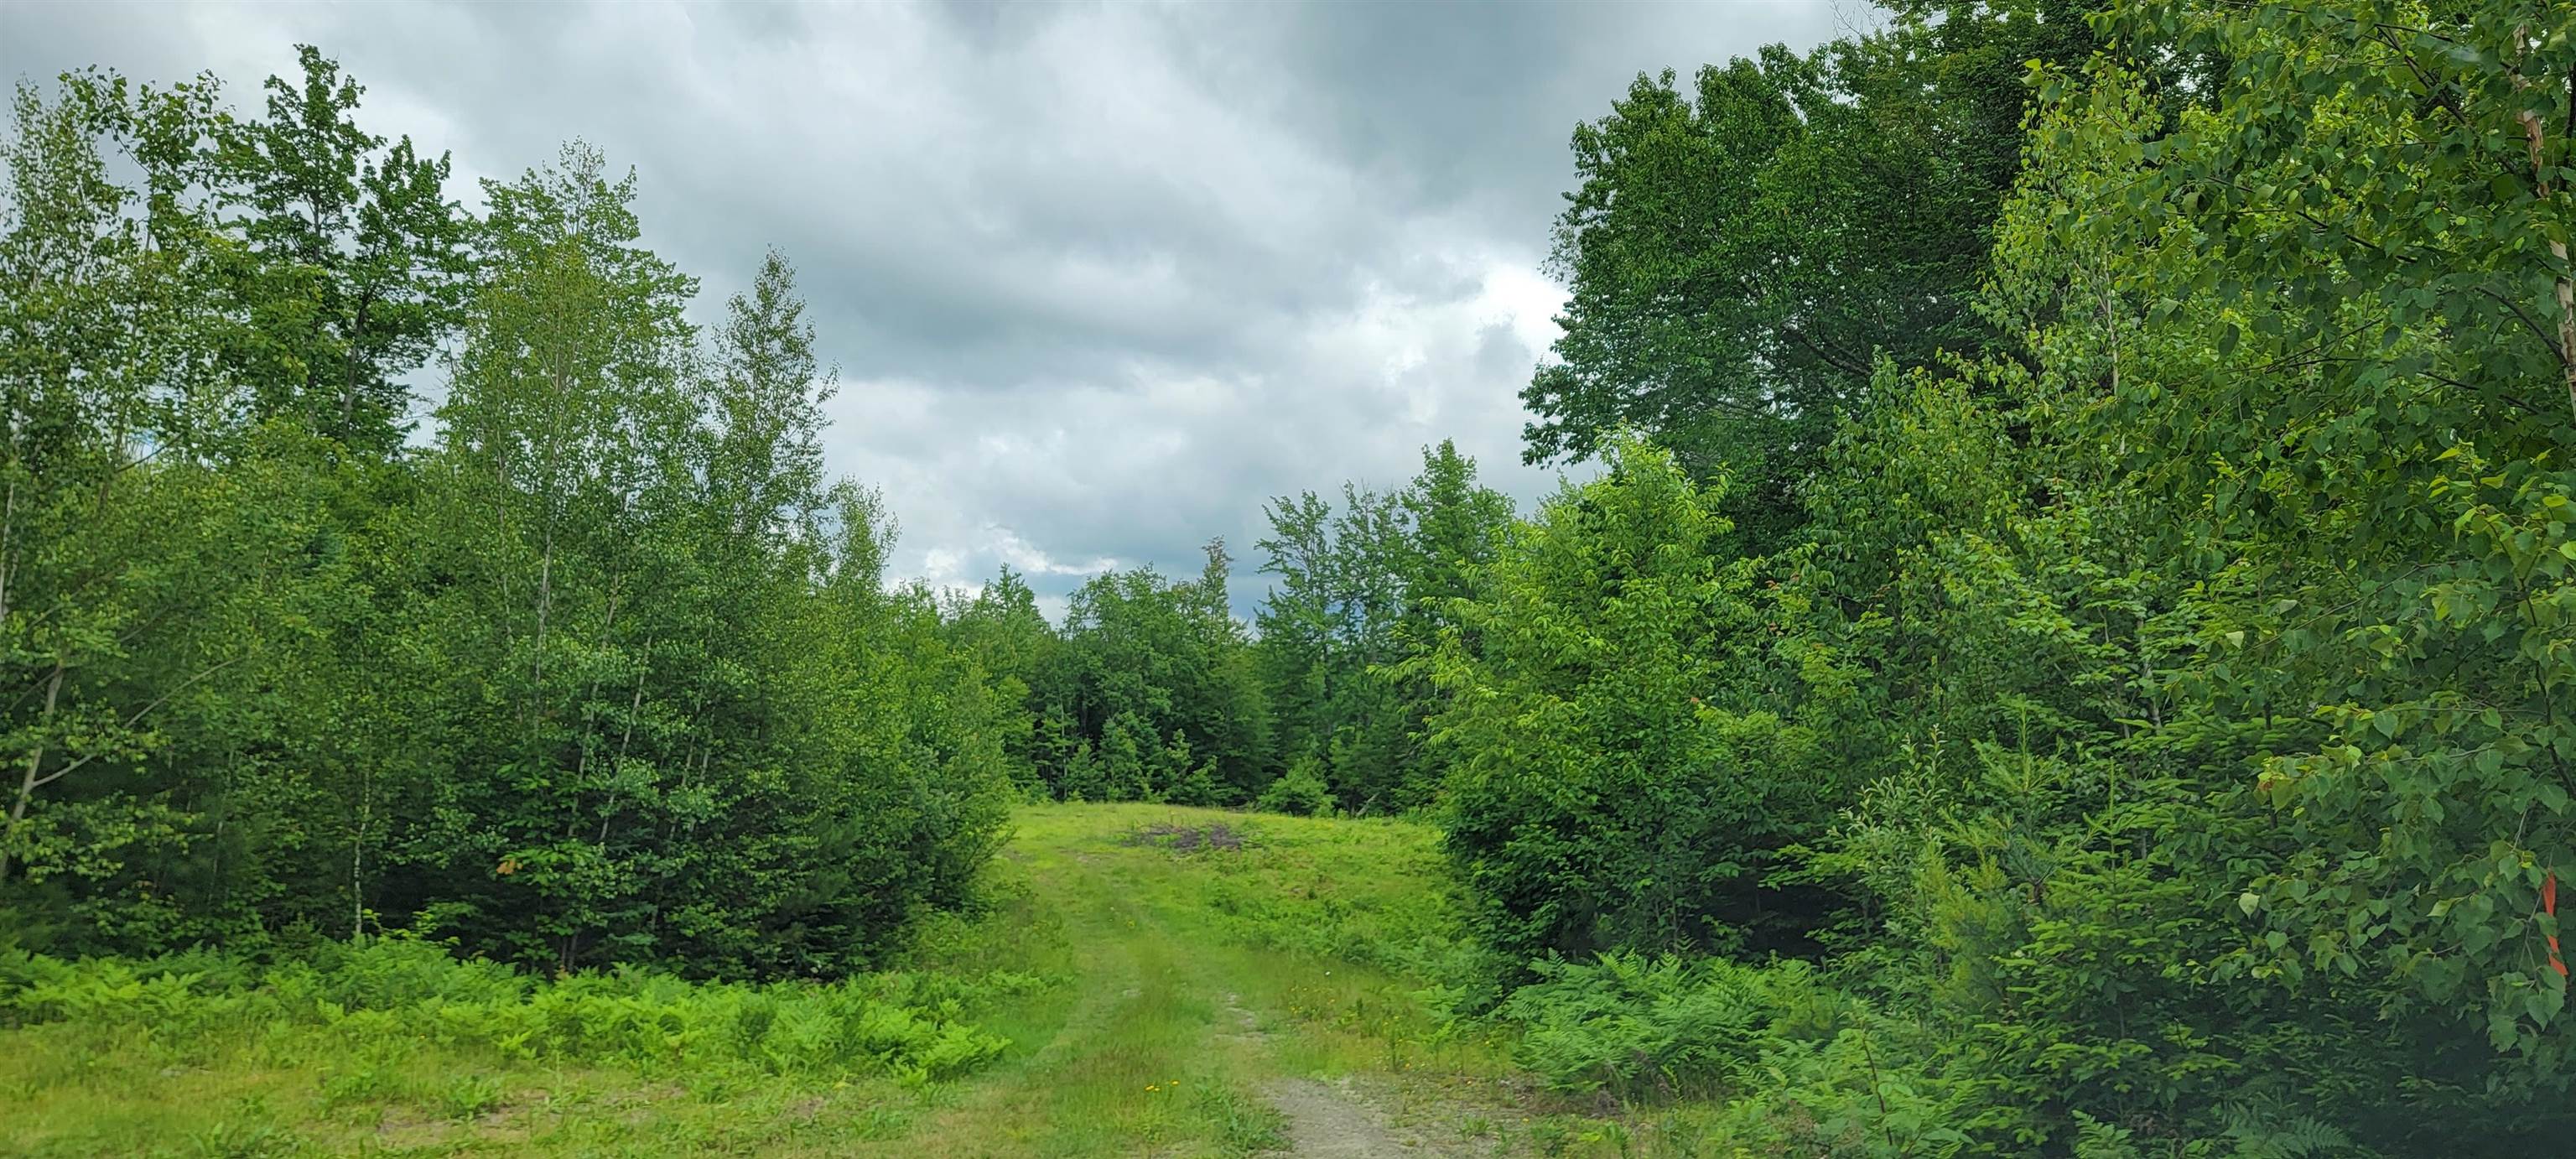 Lot 12.1 Gene's Road Whitefield, NH Photo